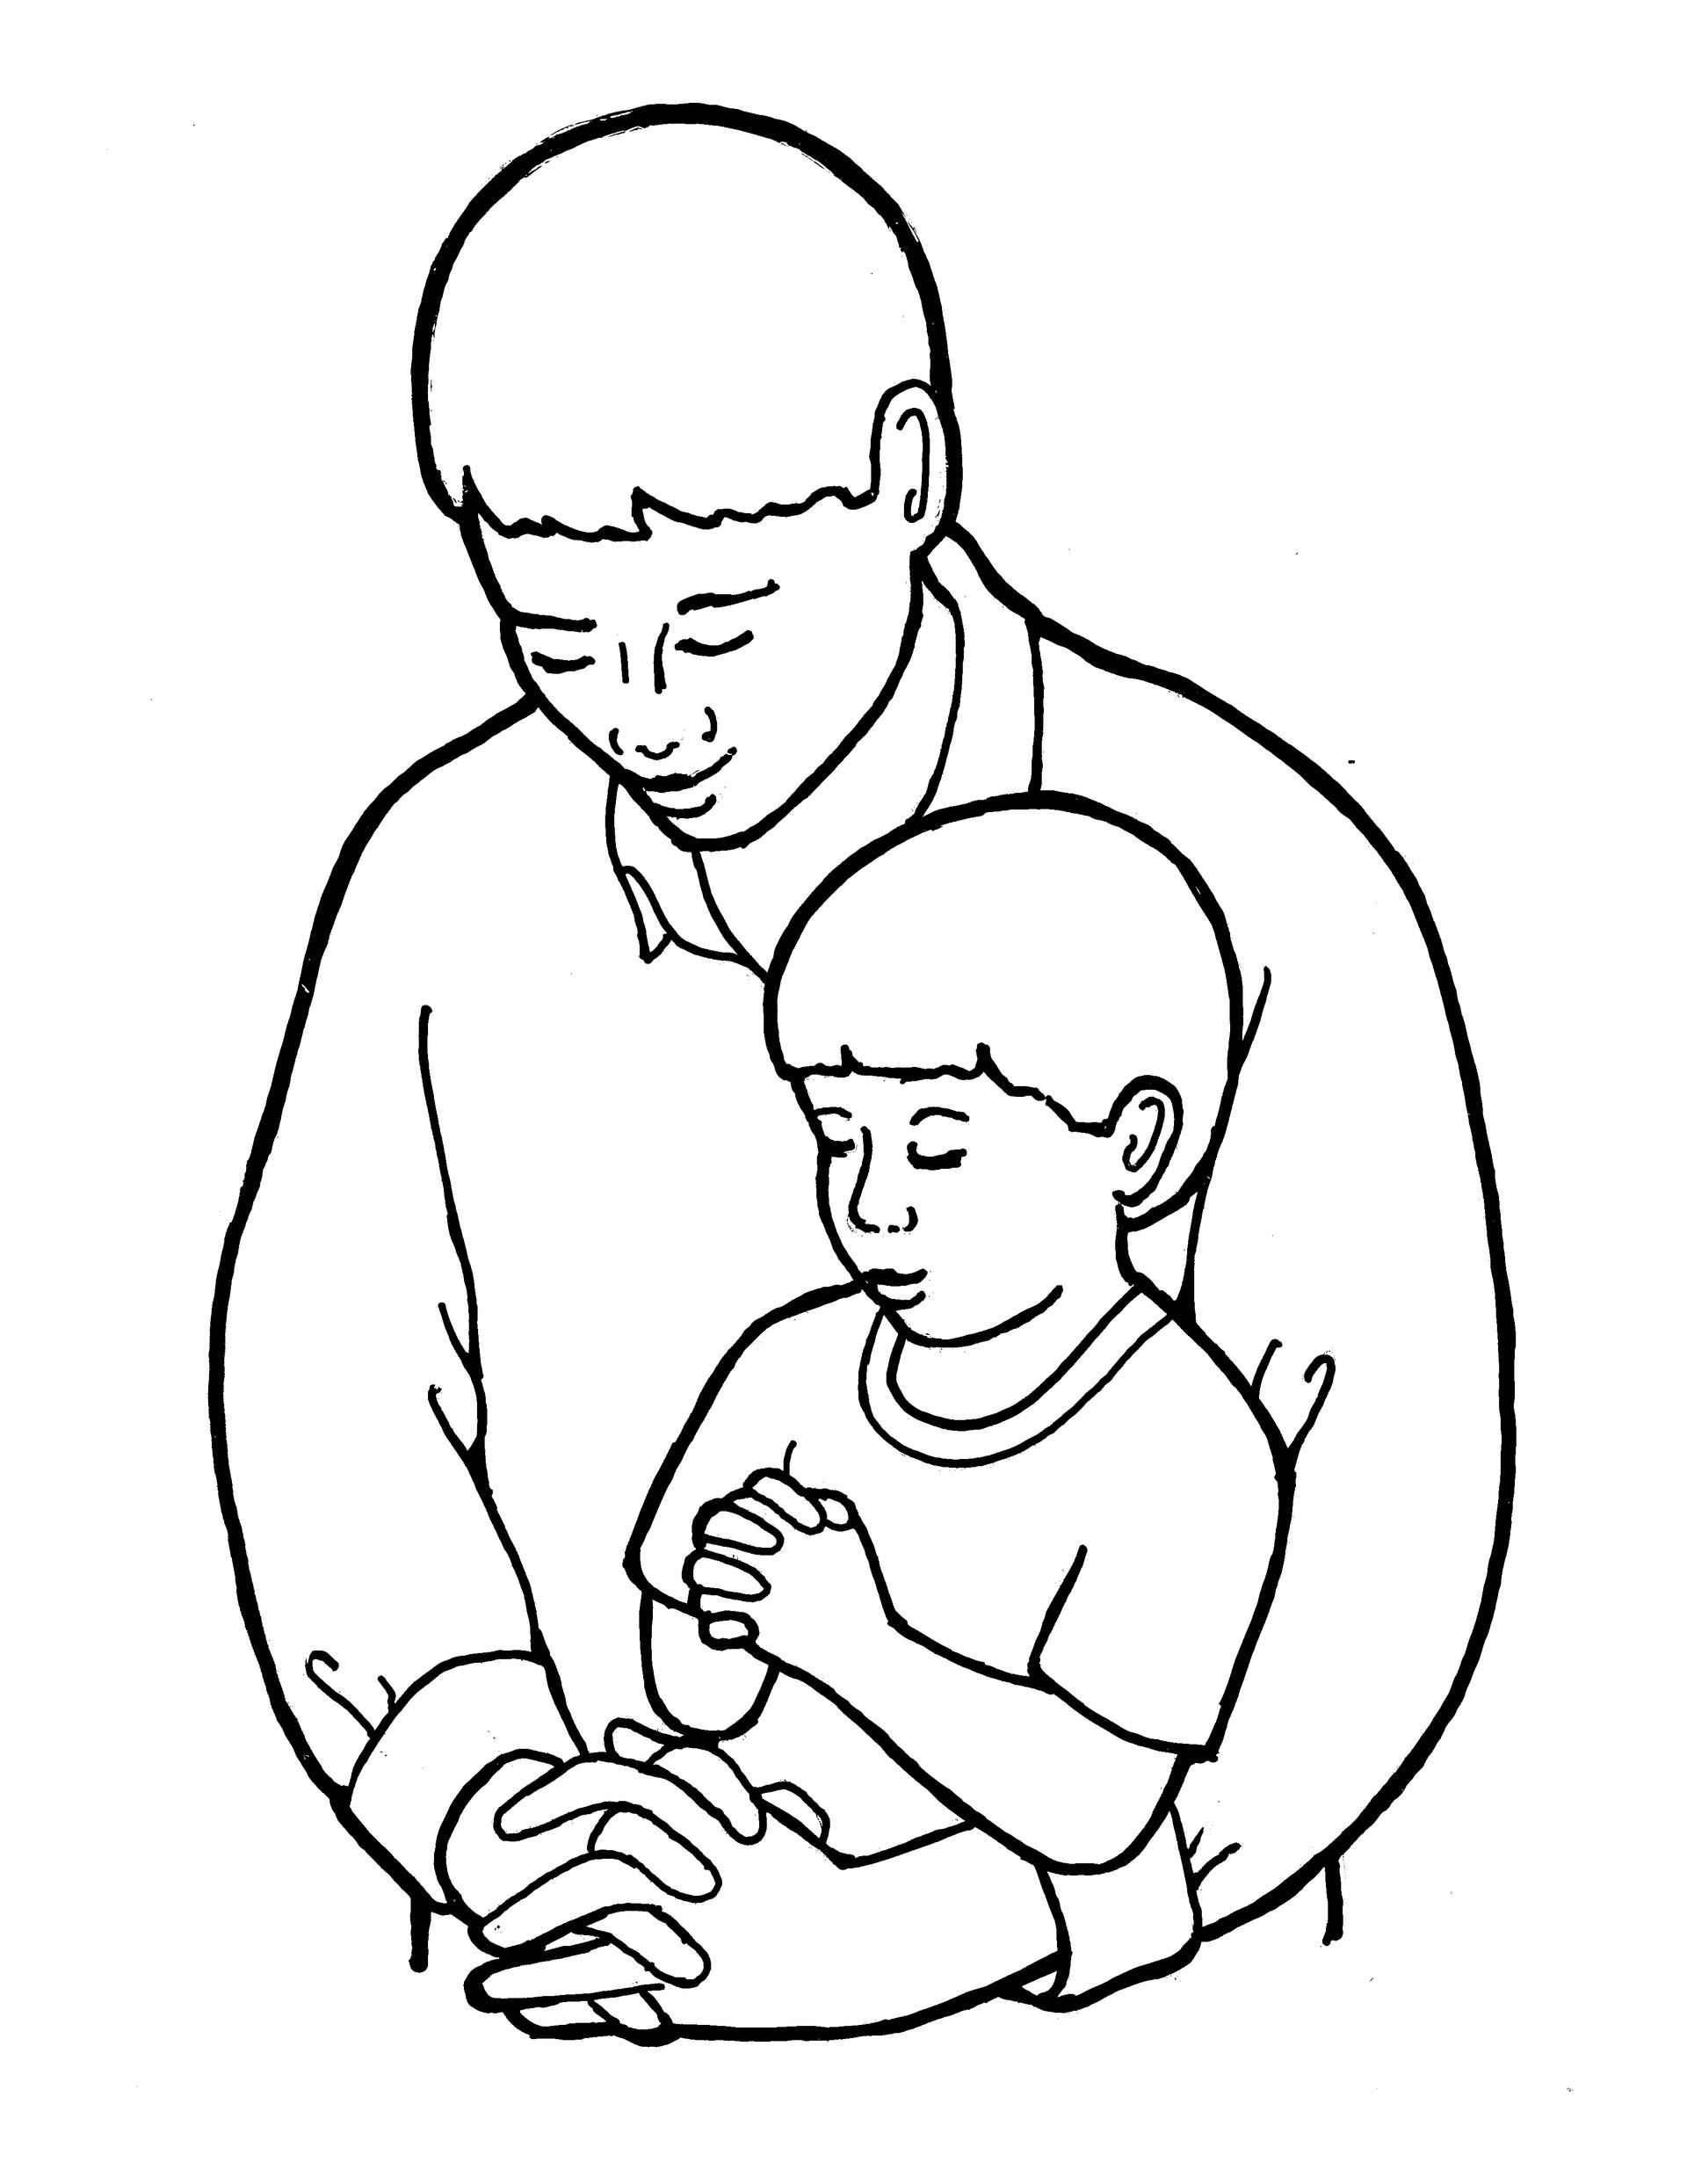 An illustration of a father helping his son pray.